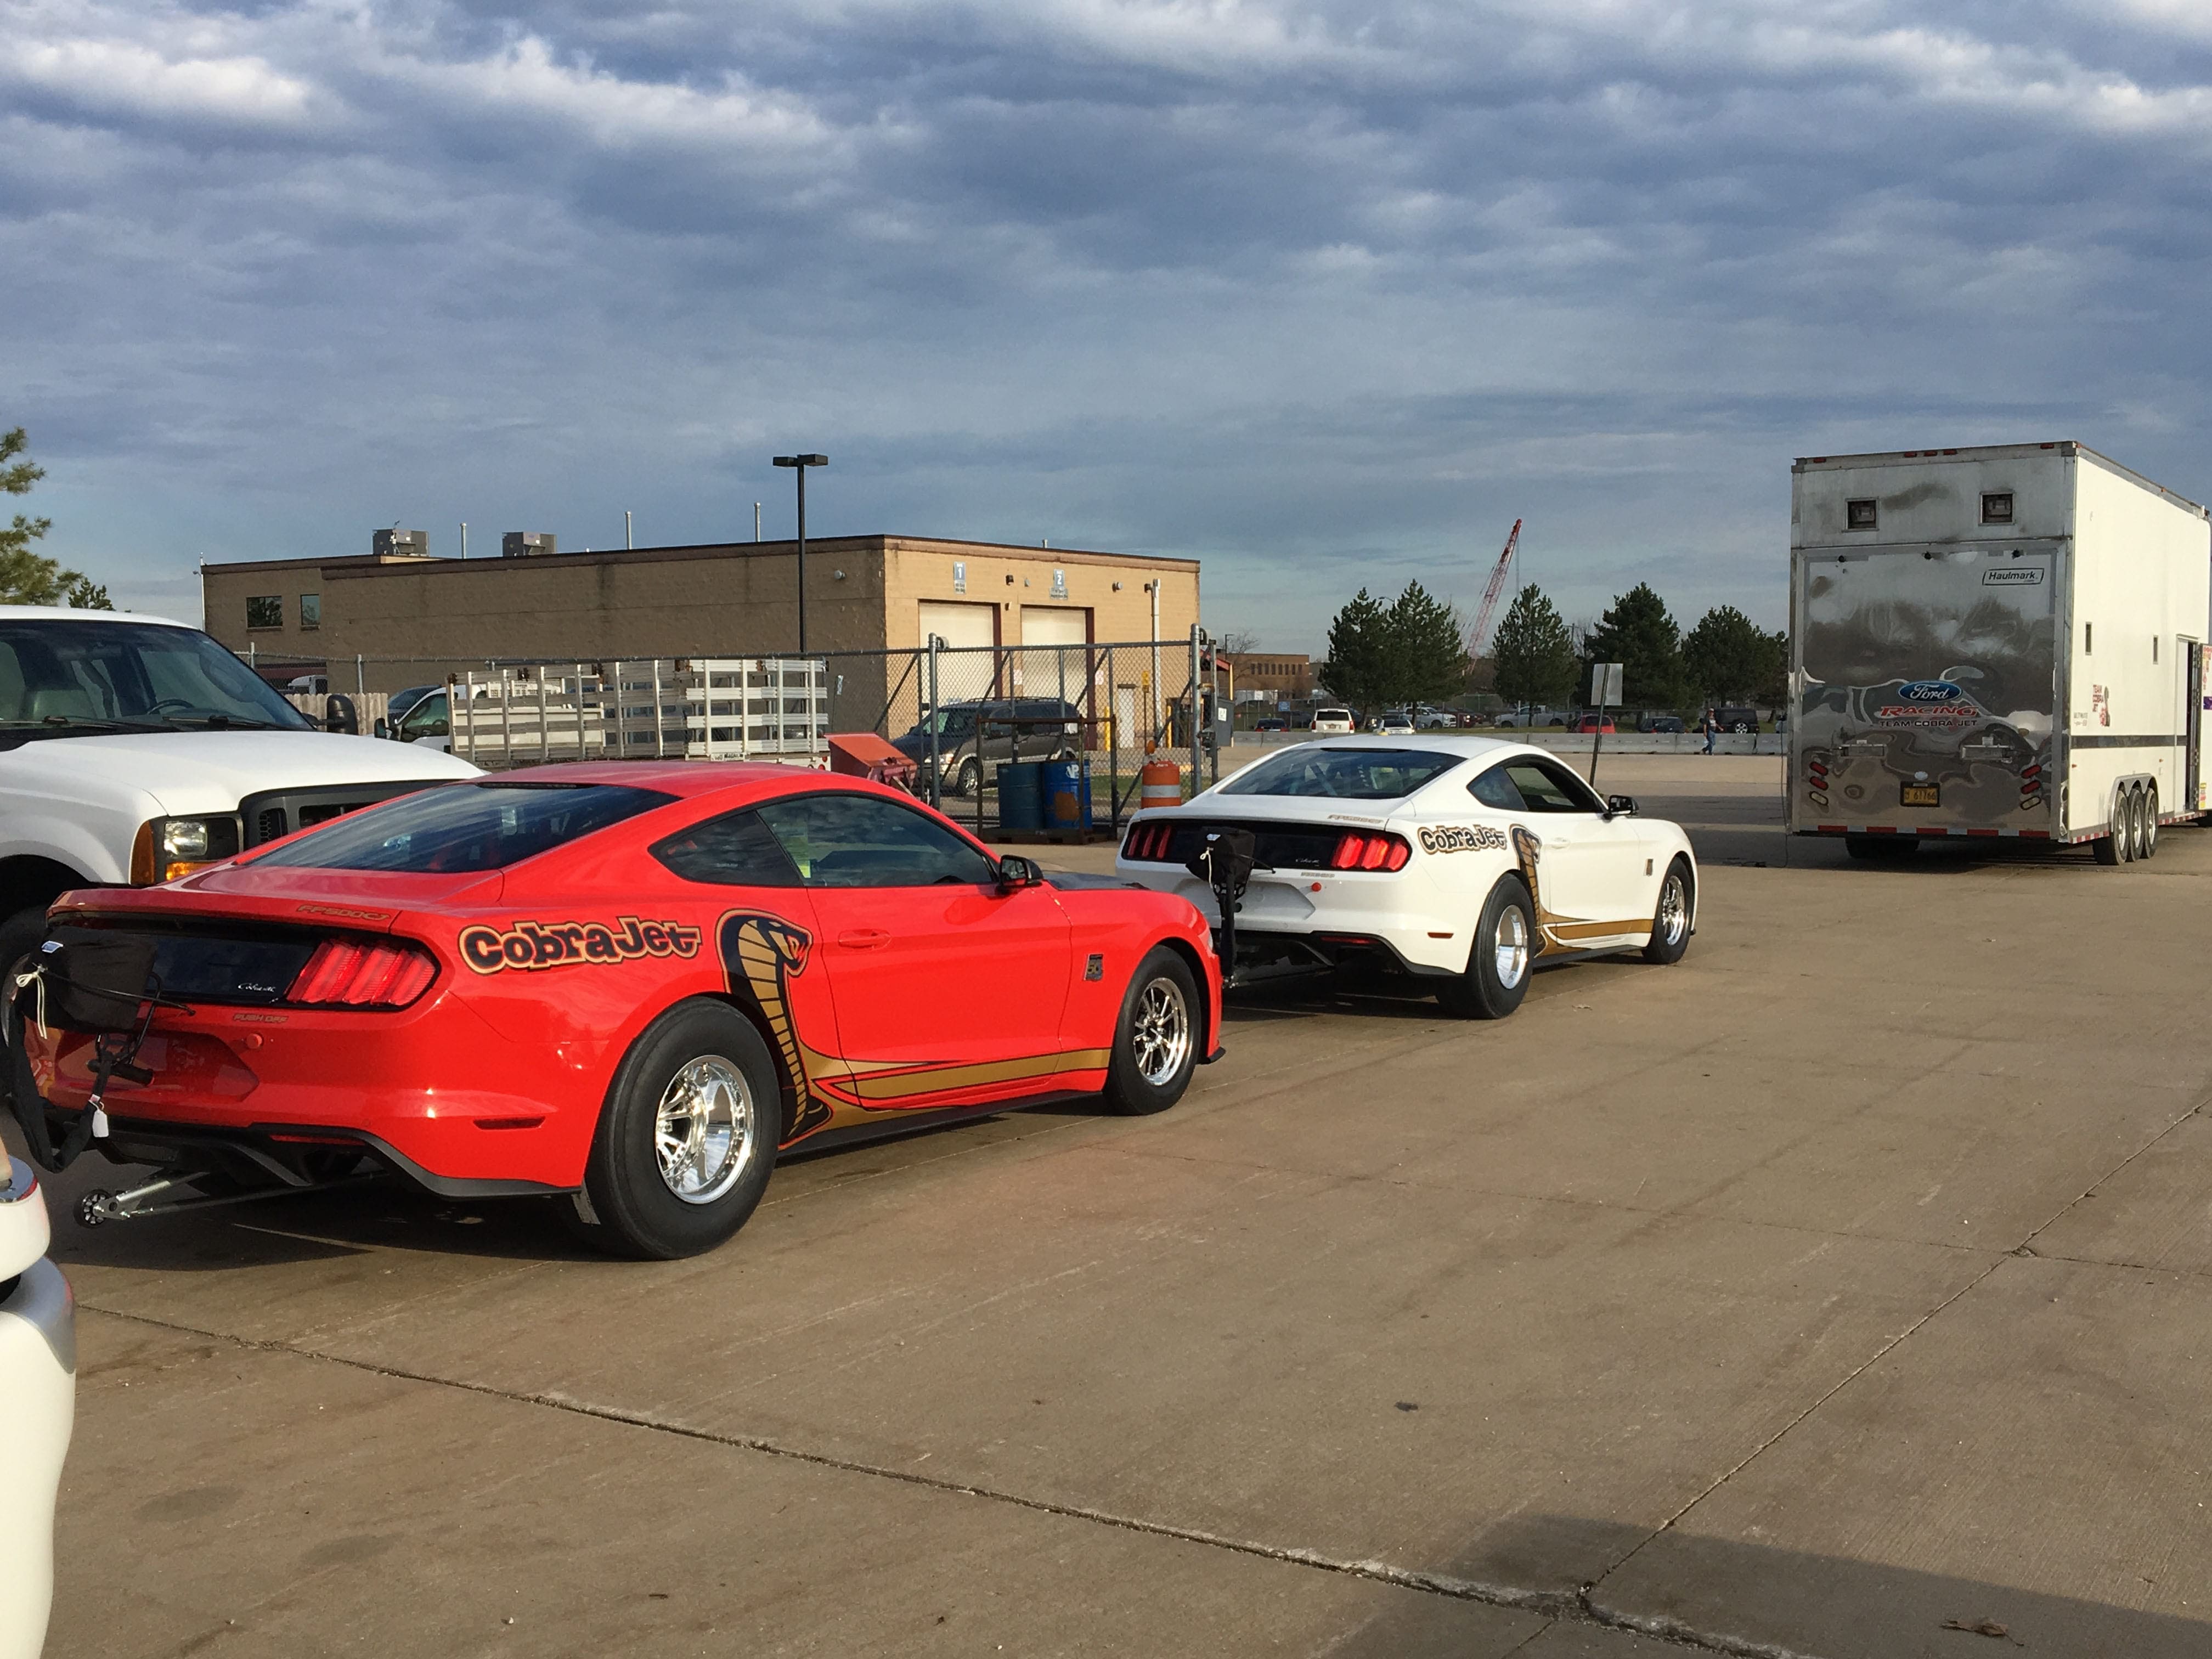 Parking lot with a red 50th Anniversary Cobra Jet and white 50th Anniversary Cobra Jet